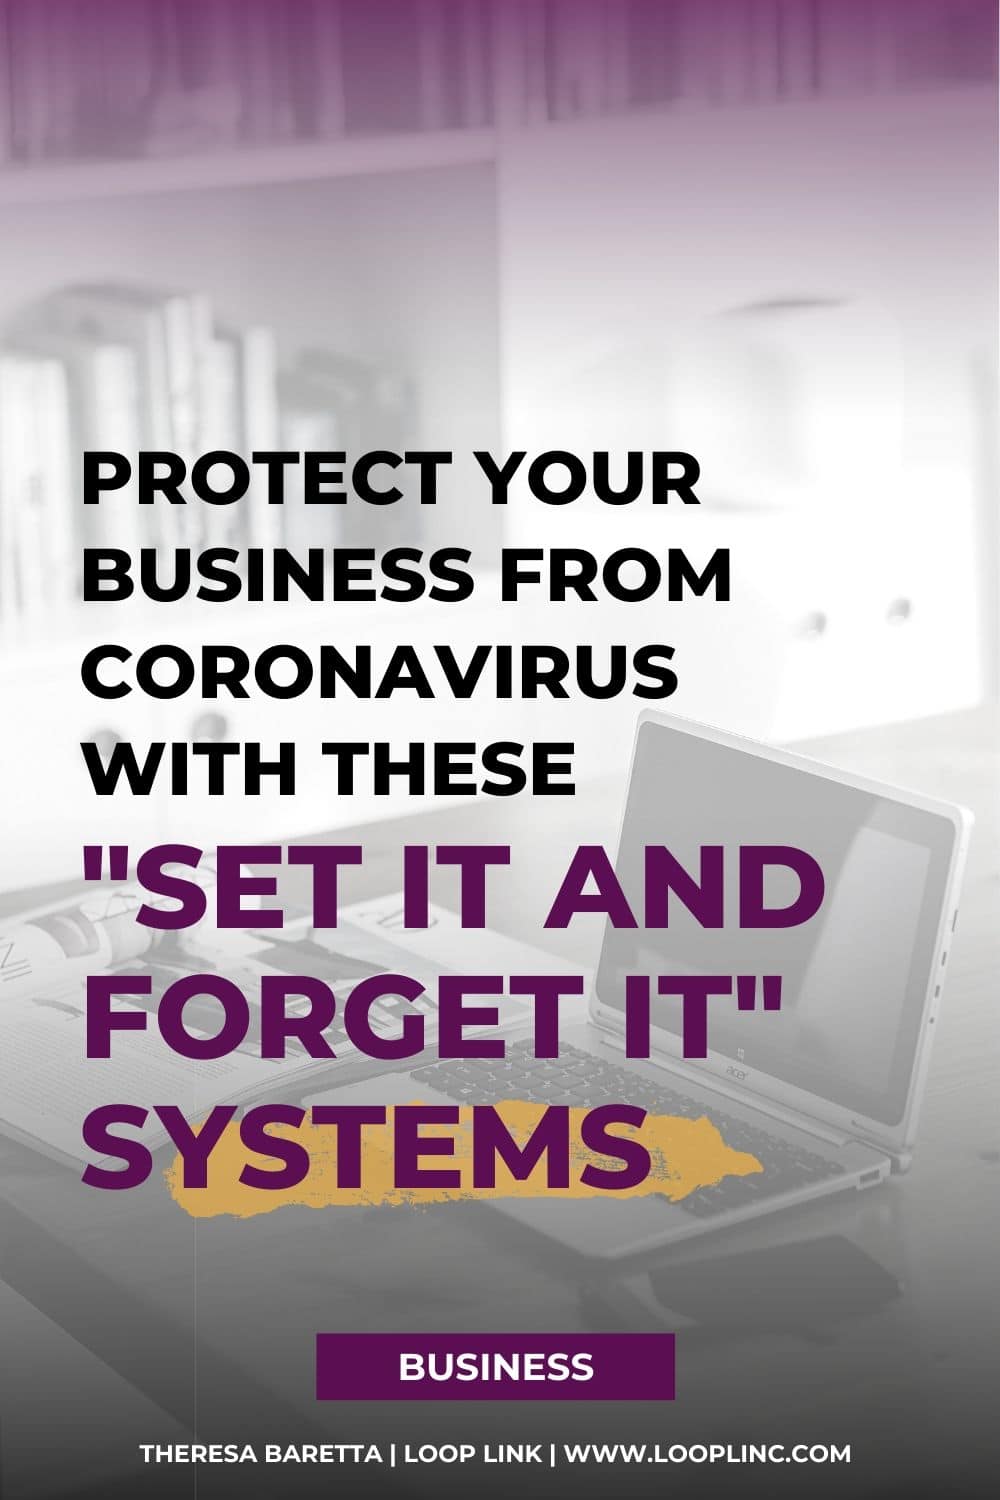 Wondering how to protect your business from coronavirus? These automated systems will keep operations flowing effortlessly in your absence.